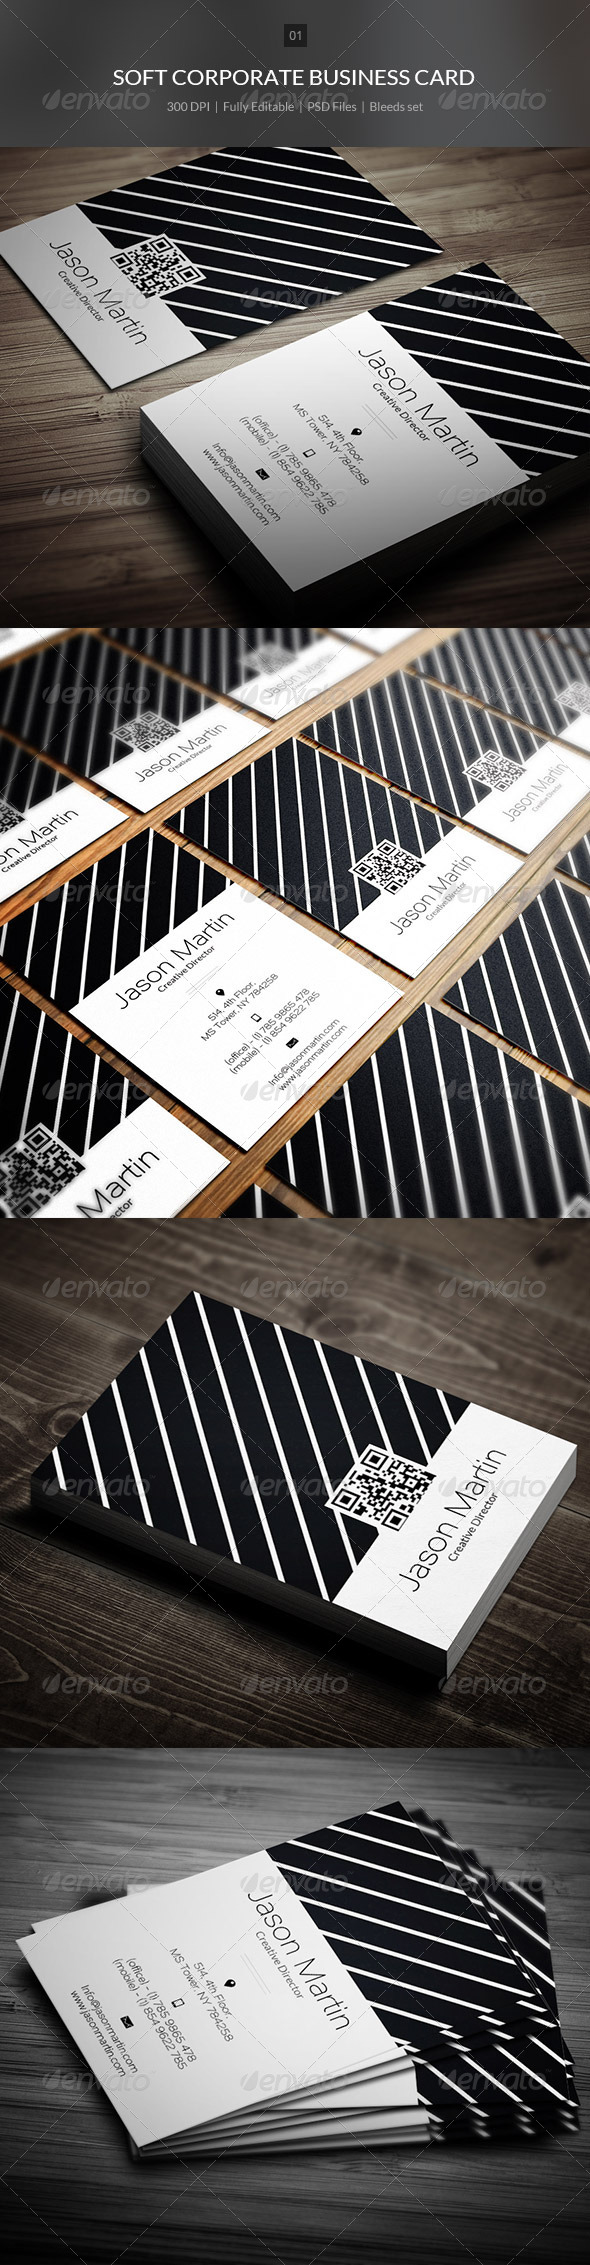 GraphicRiver Soft Corporate Business Card 01 7675491